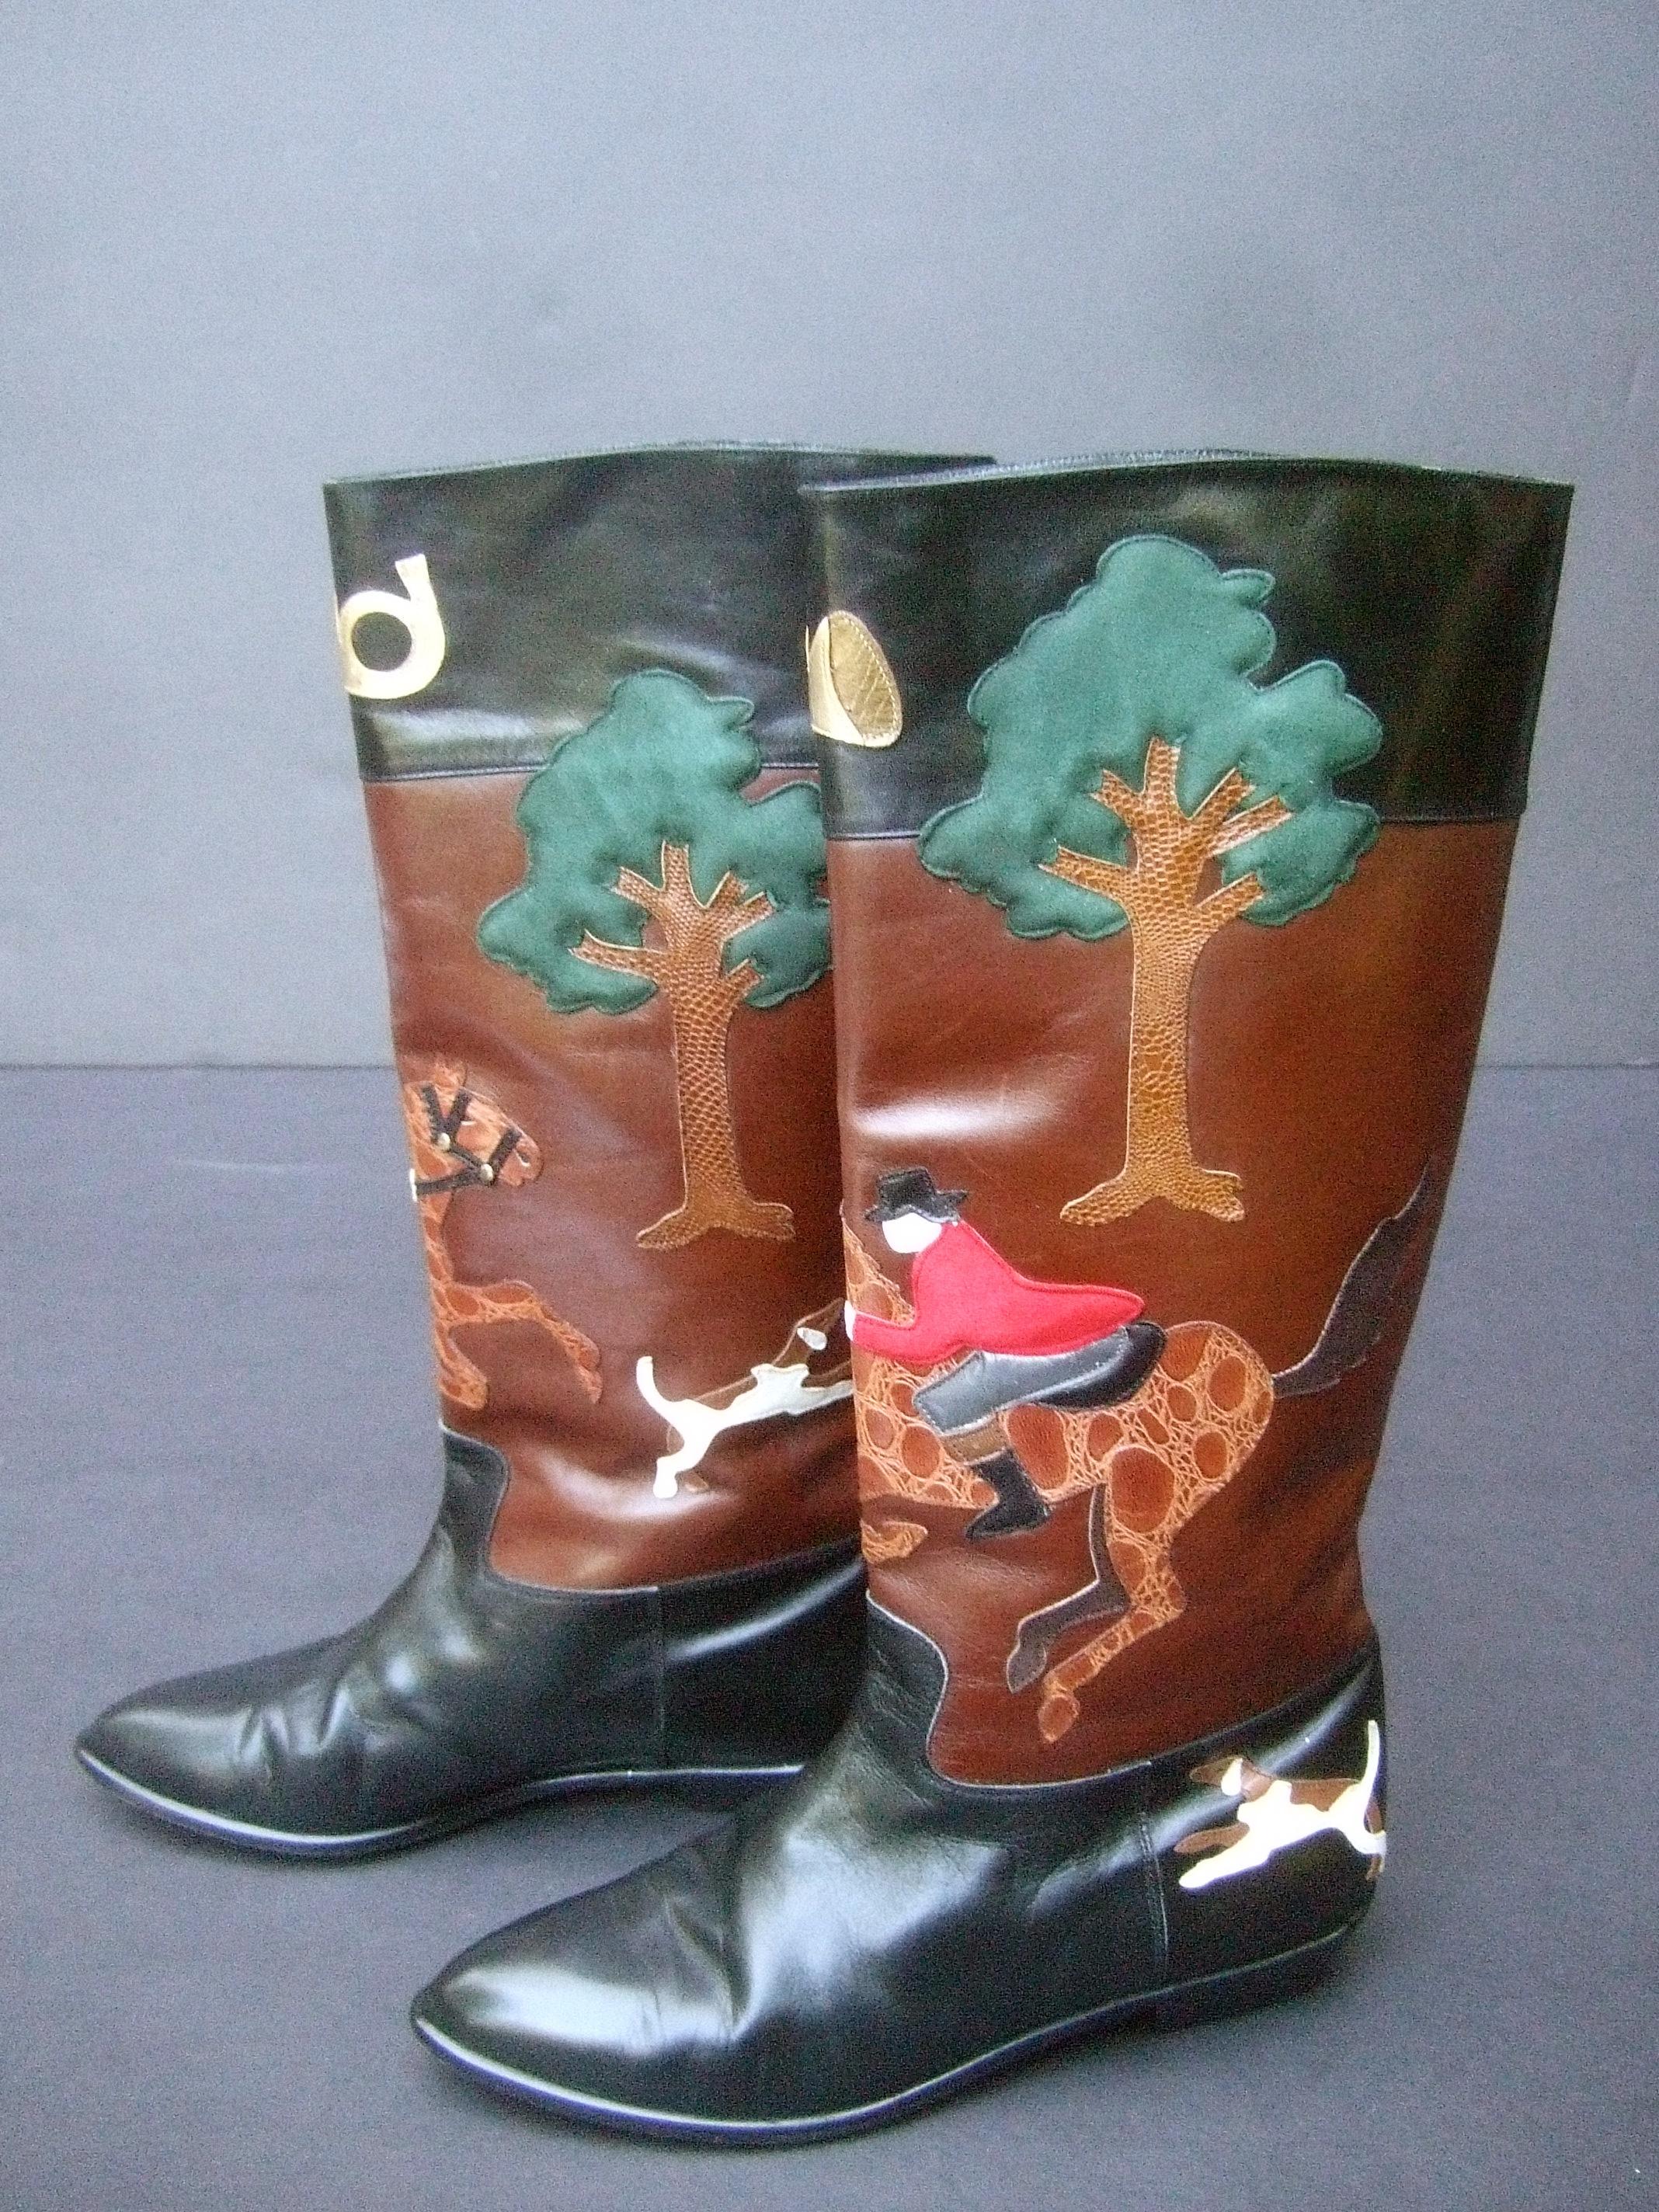 Rare unique hunt scene leather & suede applique boots designed by Beverly Feldman c 1990
The stylish black & brown leather boots depict a pair of hunters wearing red suede jackets;
mounted on brown embossed applique leather horses; surrounded by